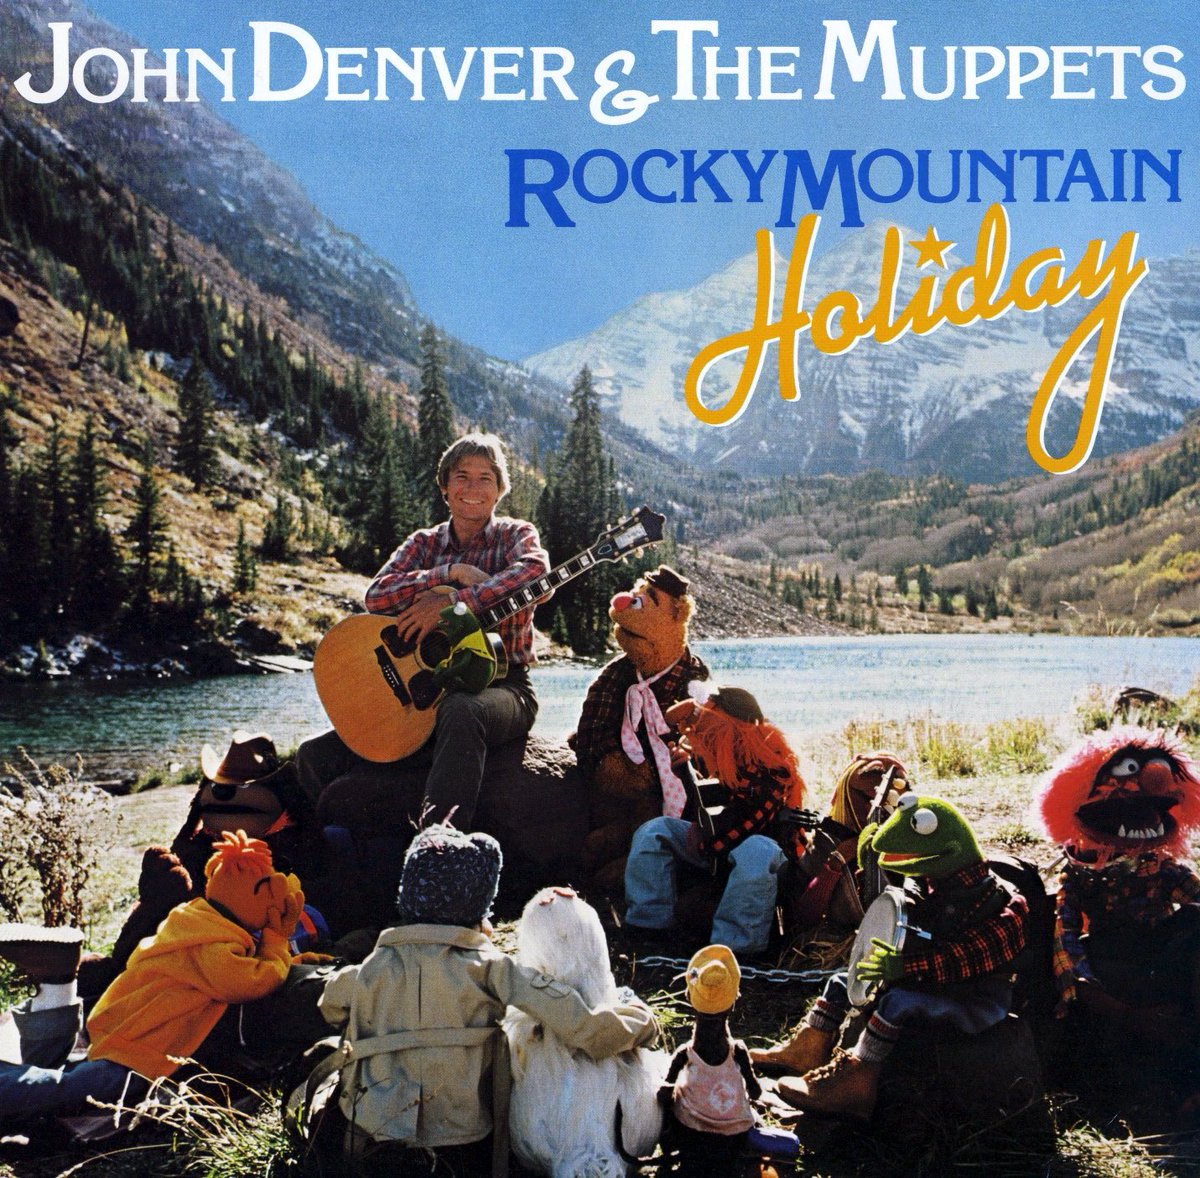 So everyone loves the Christmas album with John Denver and the Muppets (because it is wonderful) But what would it take to get this rereleased so more people can discover what a classic it is?